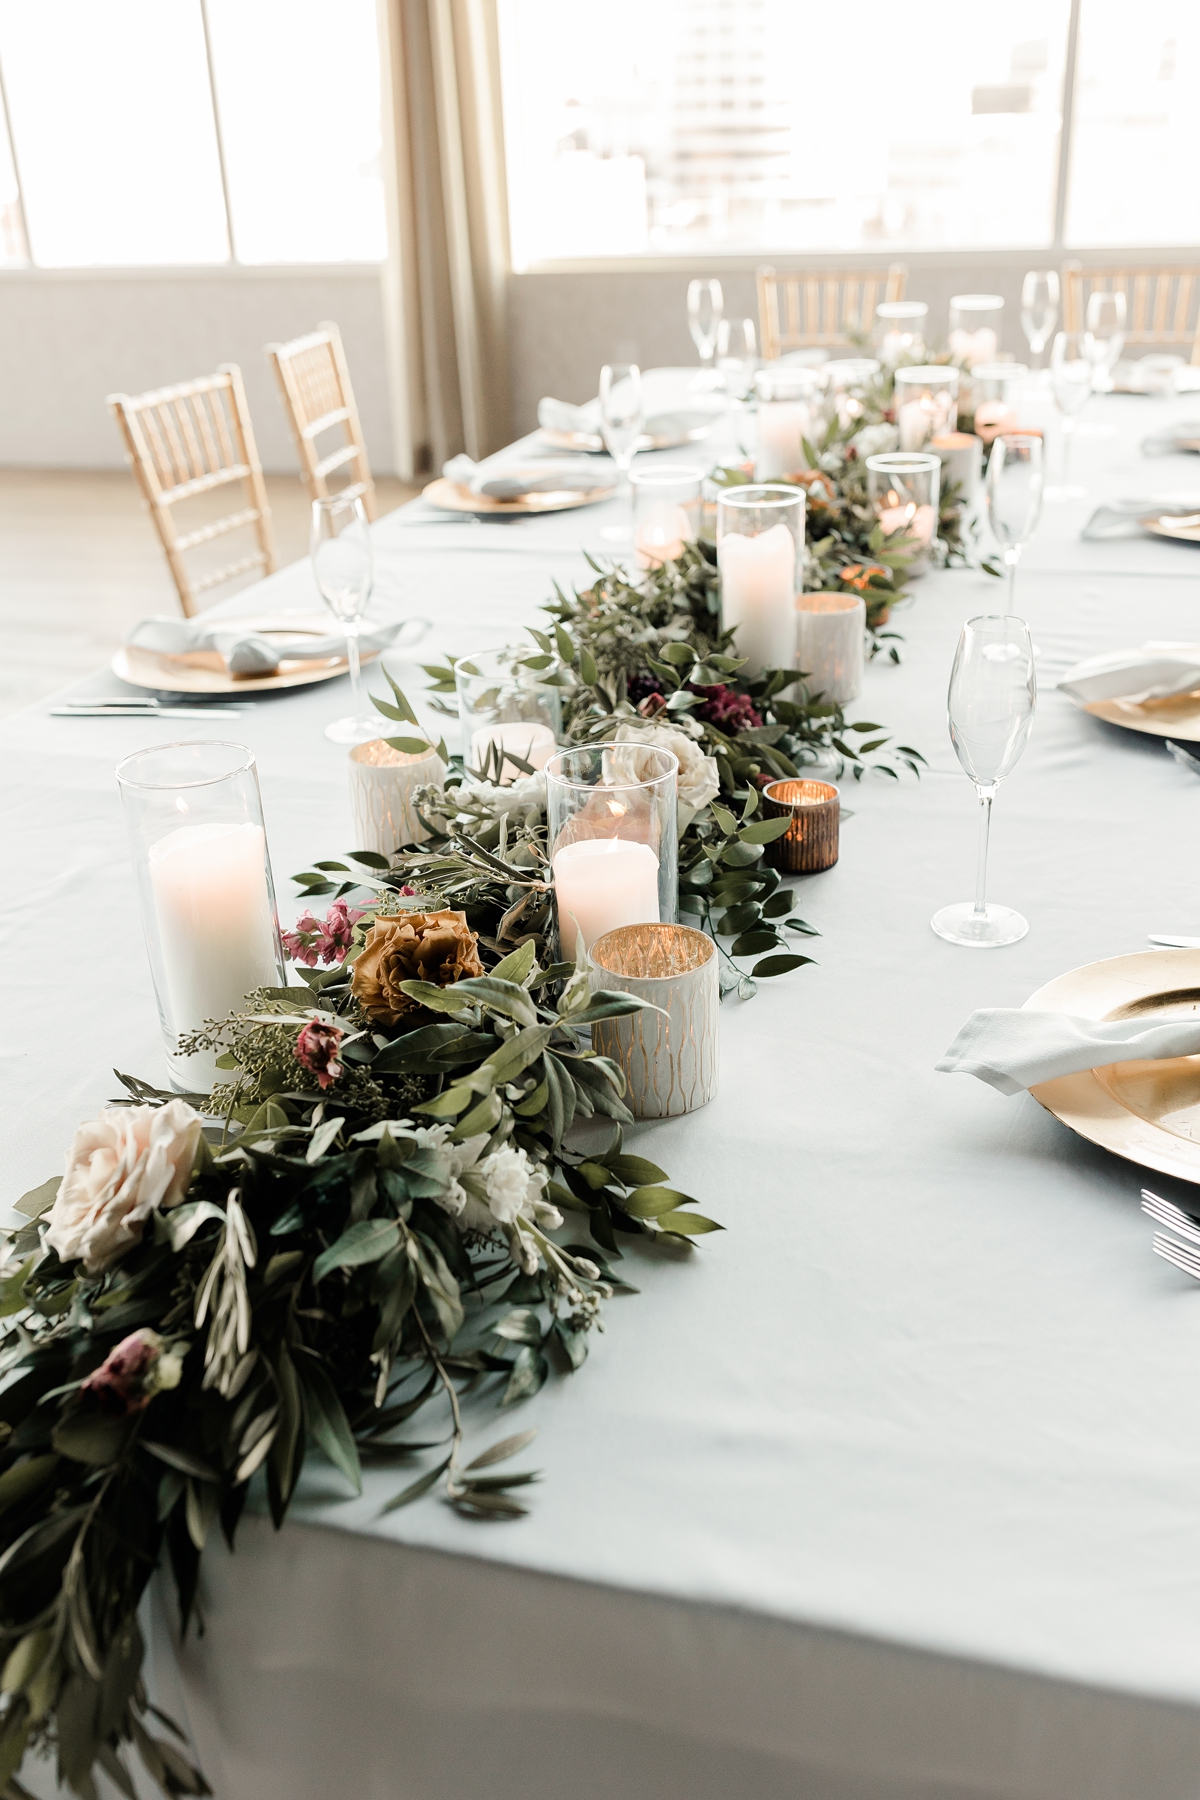 wedding reception greenery centerpiece ideas with candles